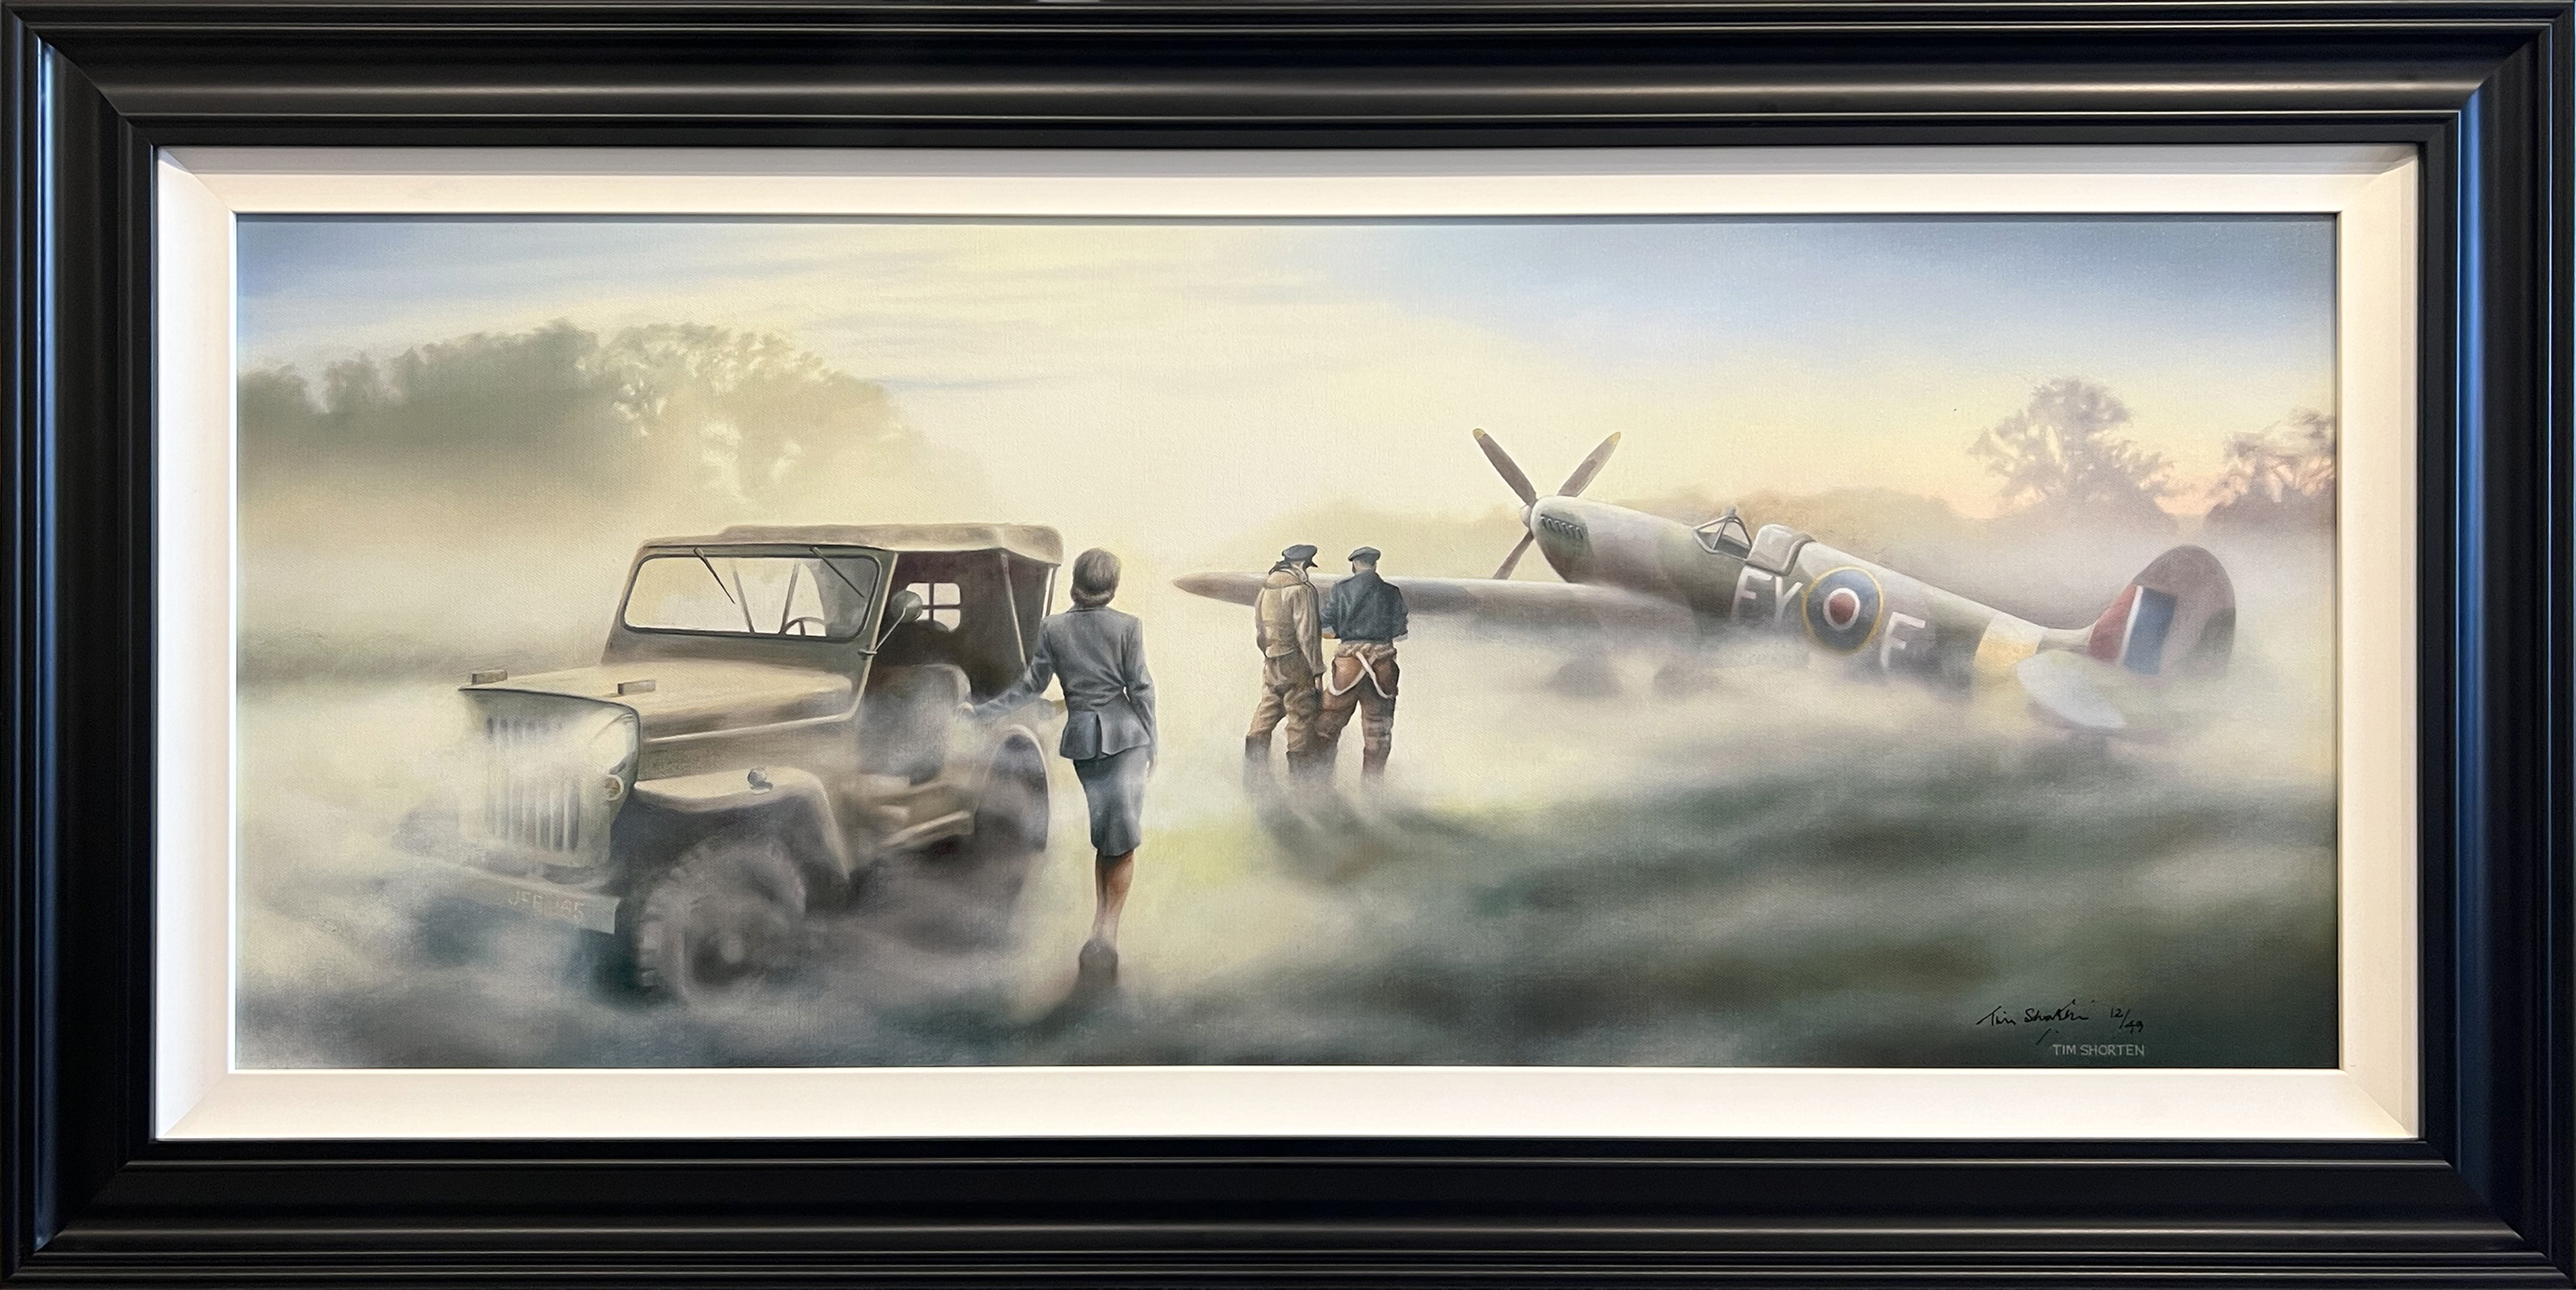 Tim Shorten, Signed Limited Edition Giclee on Canvas, Morning Debrief